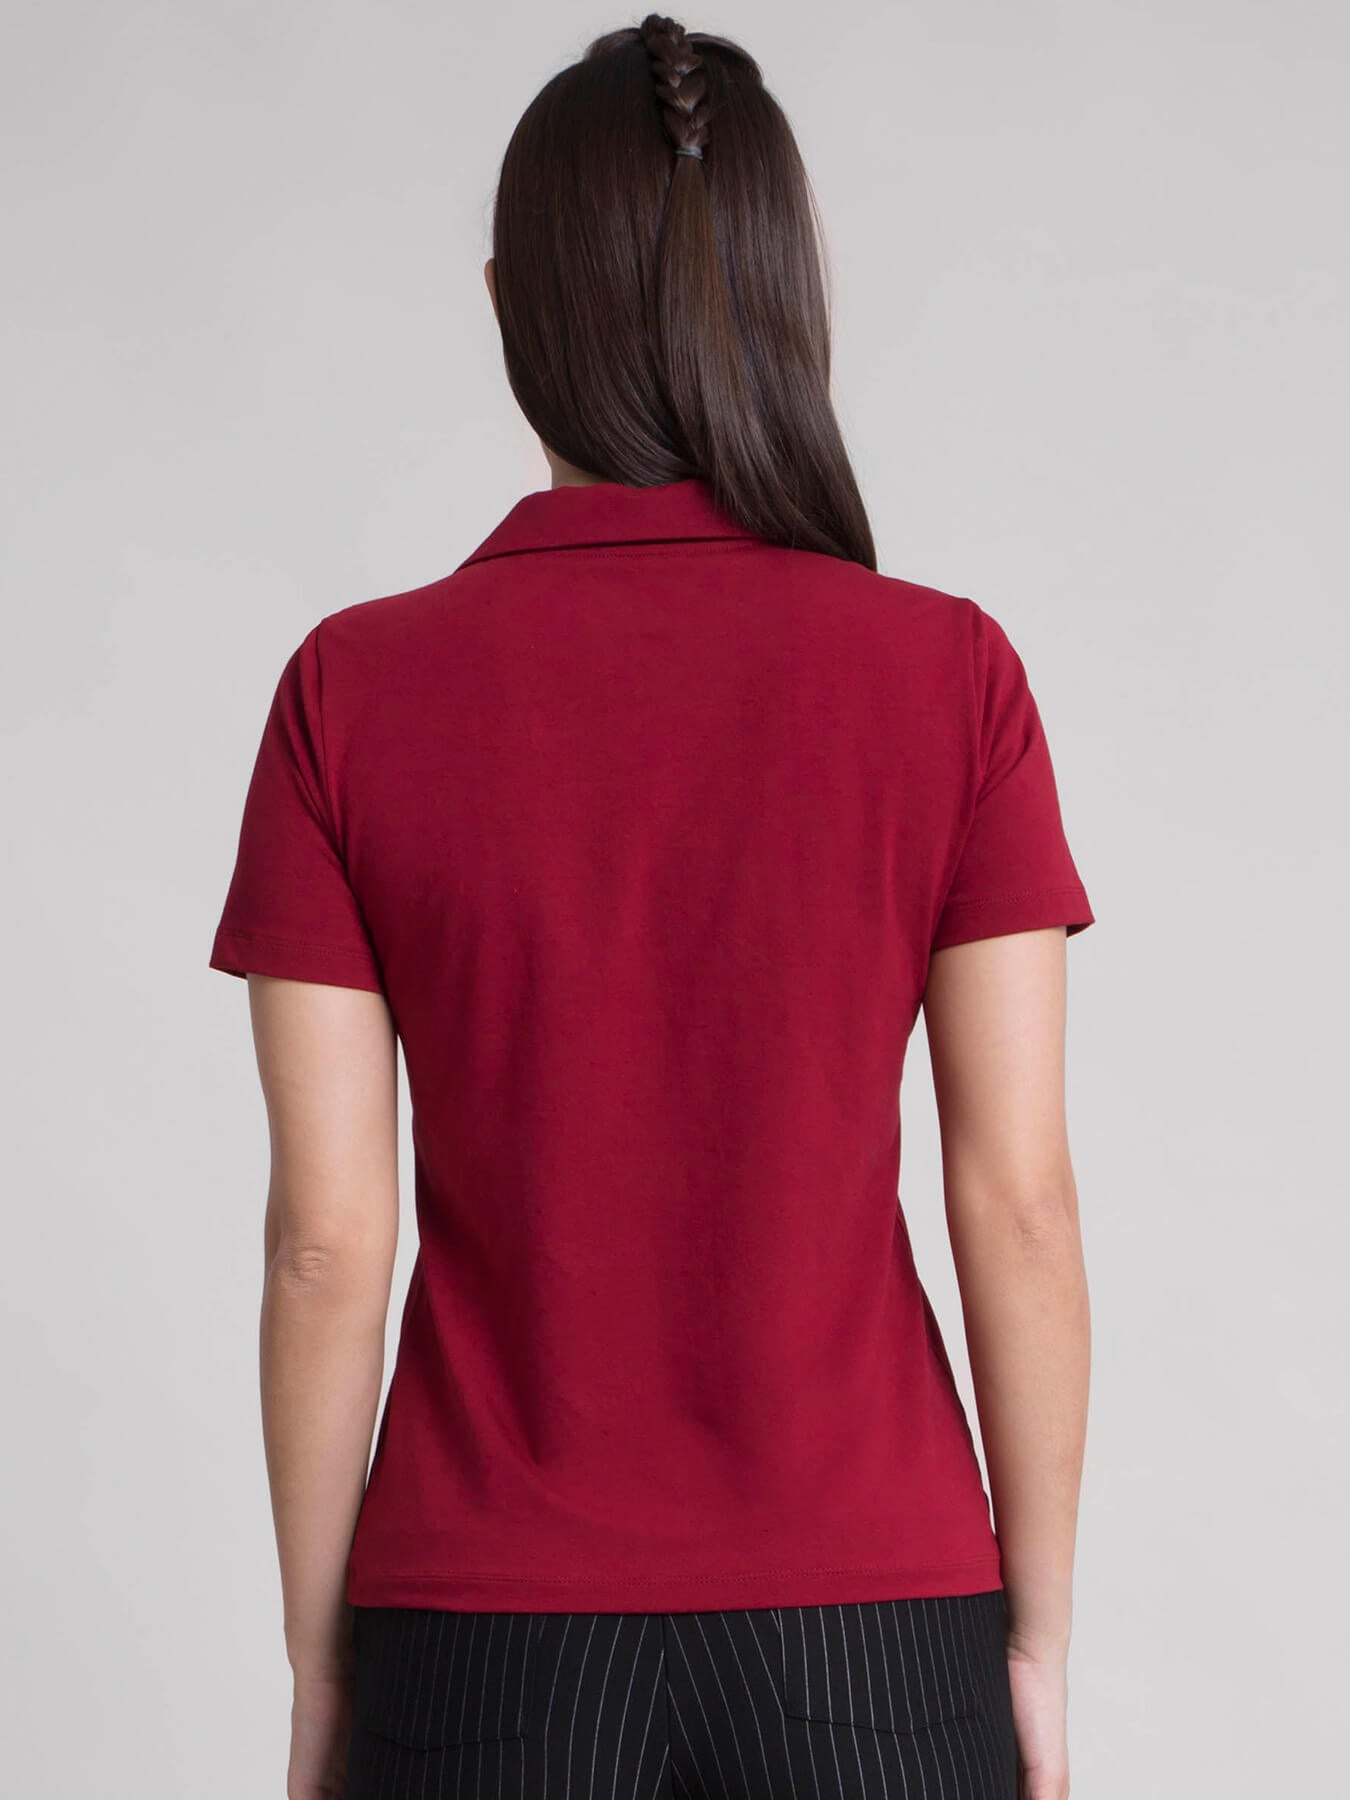 4 Way Stretch Collared LivIn T-shirt - Maroon